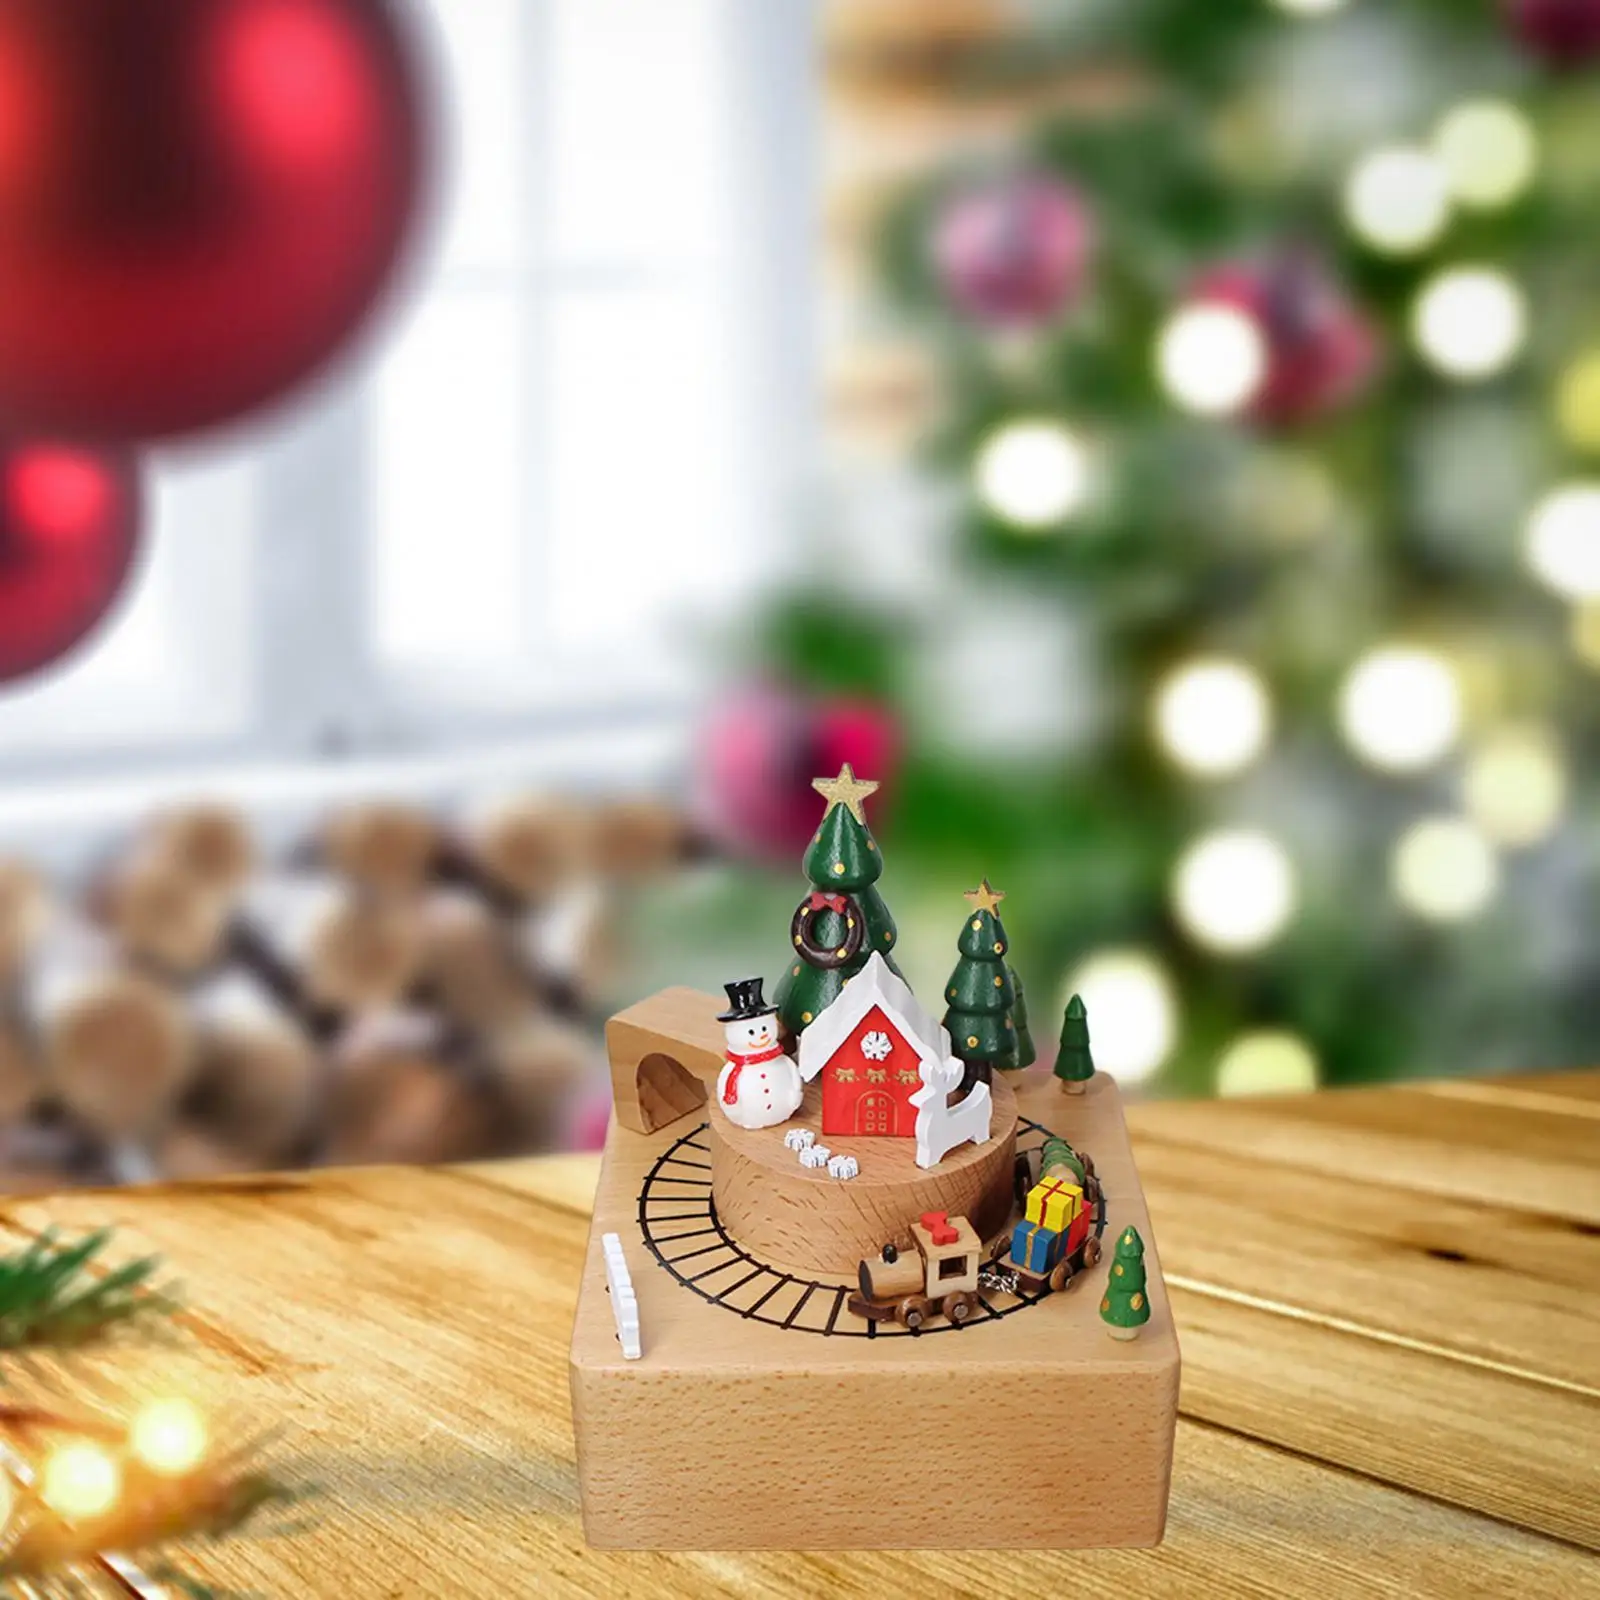 Christmas Wooden Musical Box with Revolving Trains Play Melody ``merry Christmas`` for Children Wife Girlfriend Friends Birthday